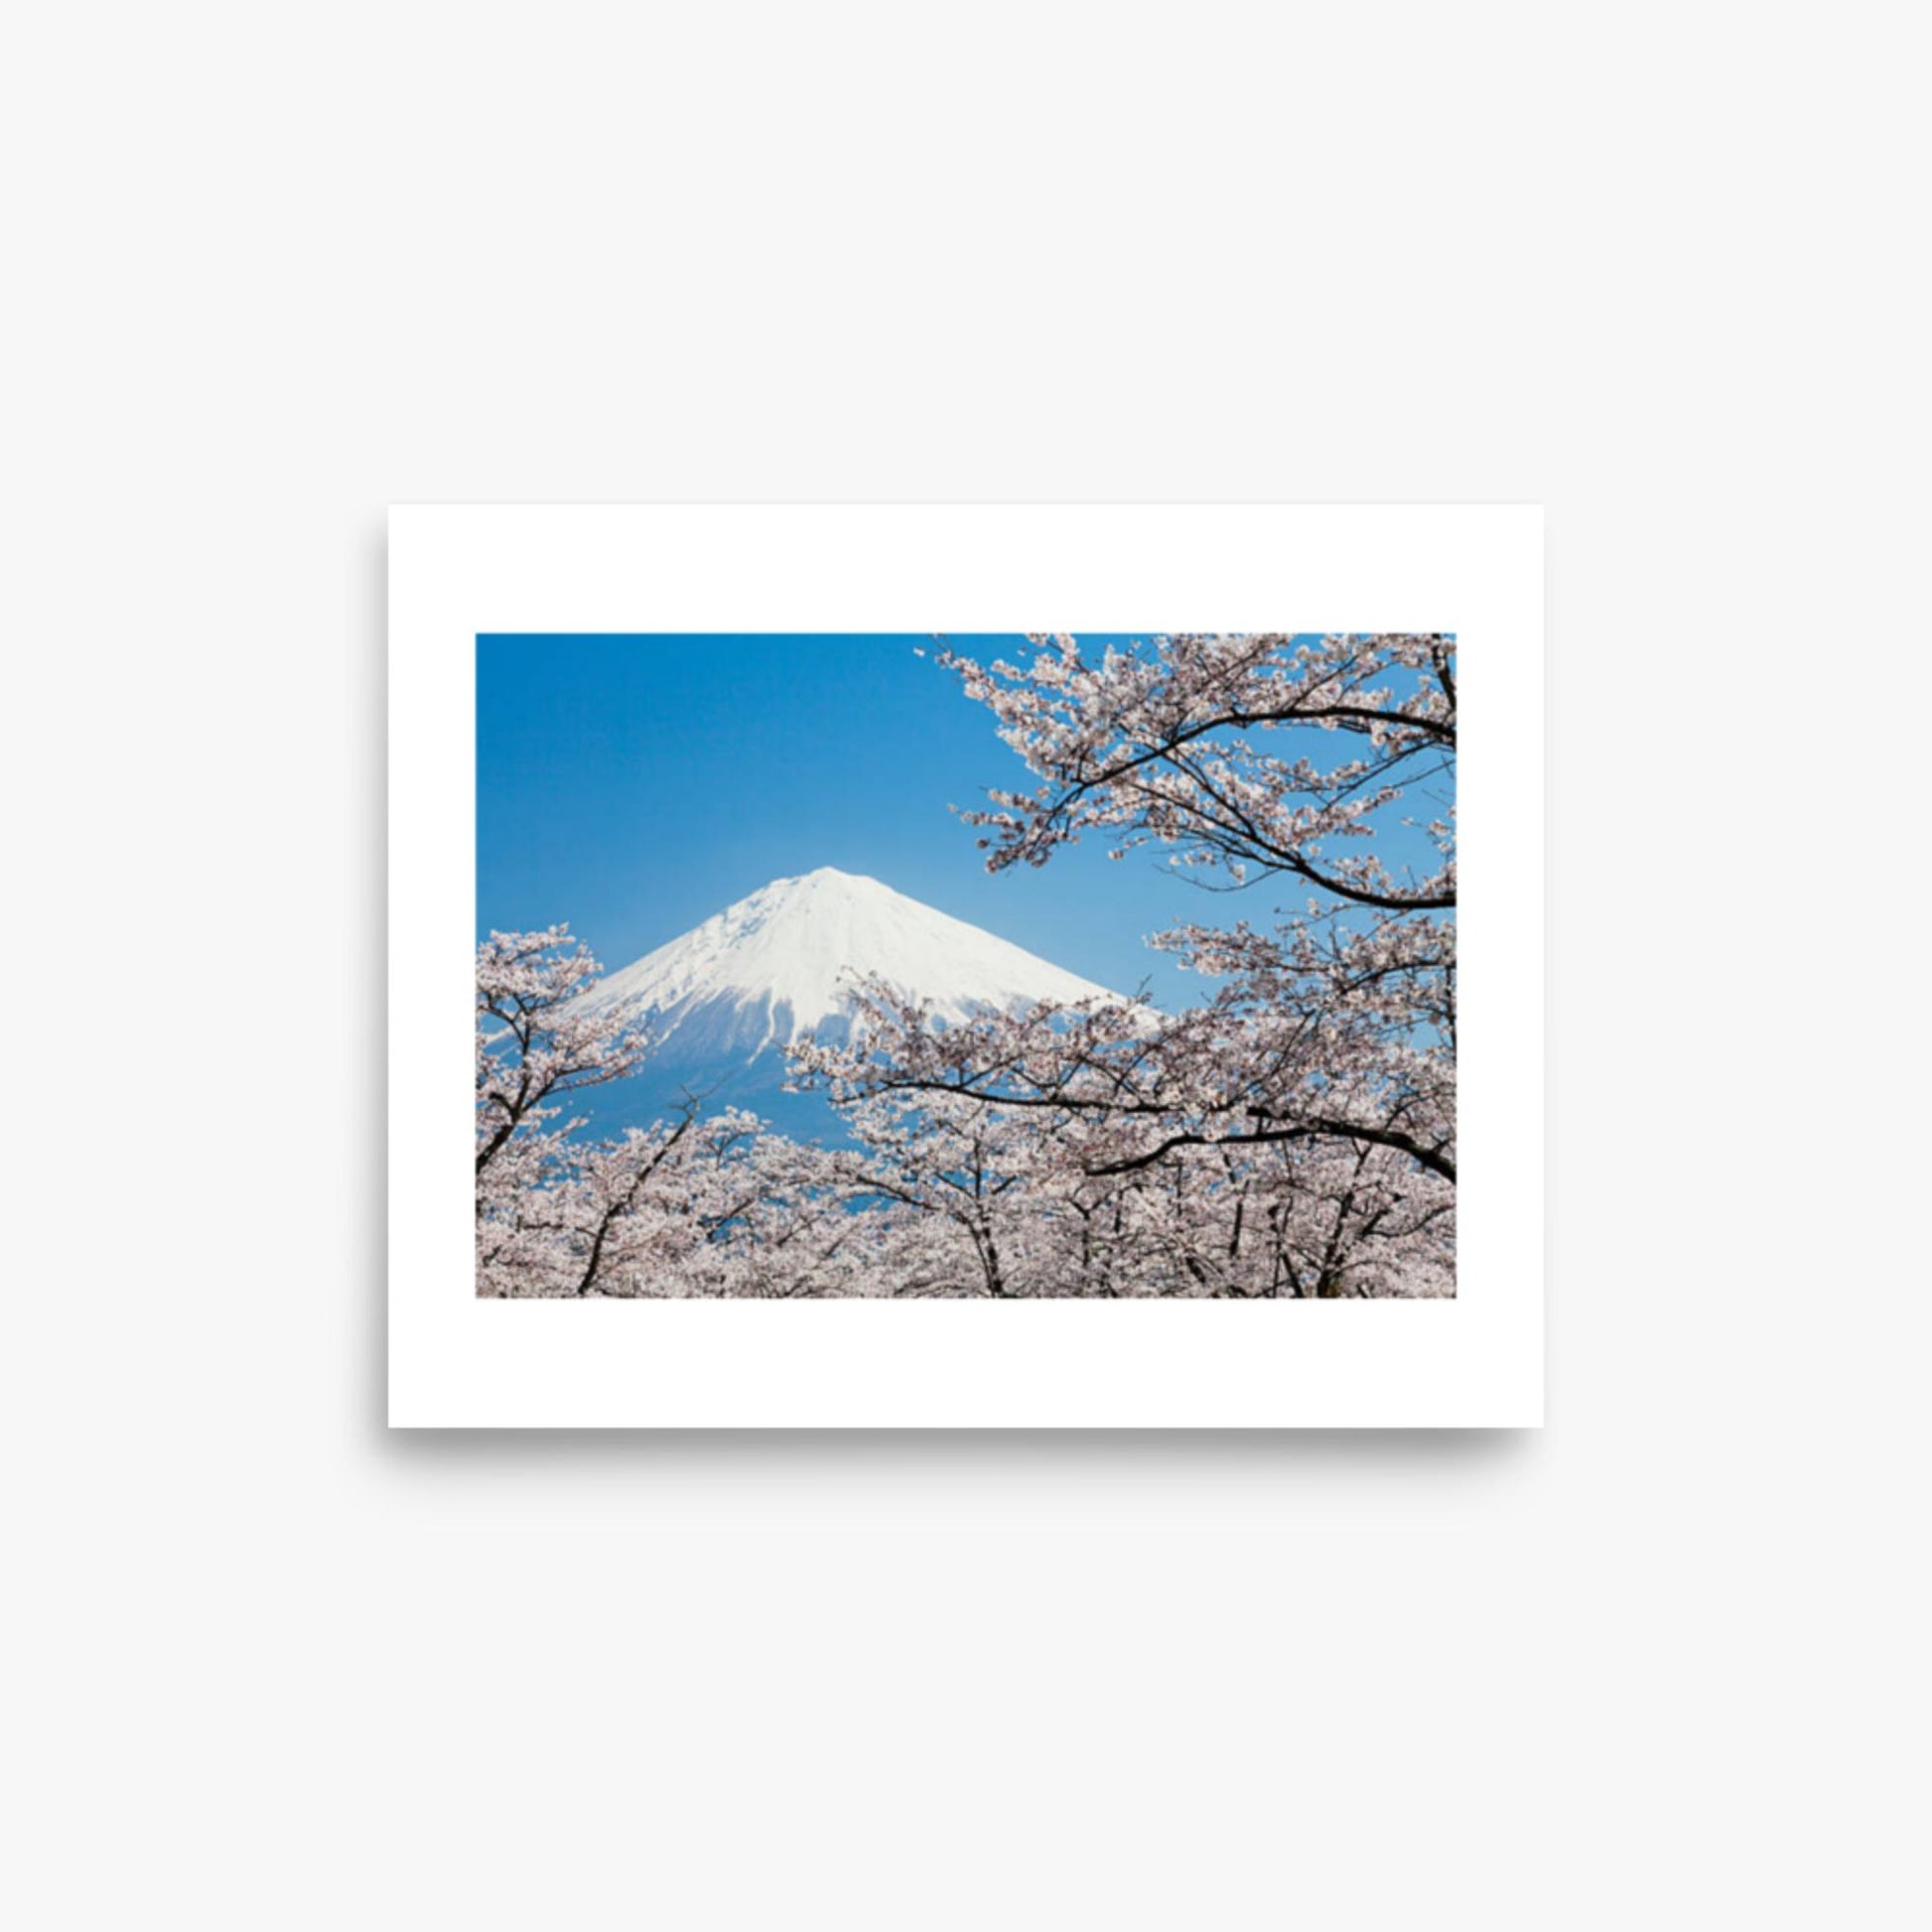 Mount Fuji & Cherry Blossoms 8x10 in Poster